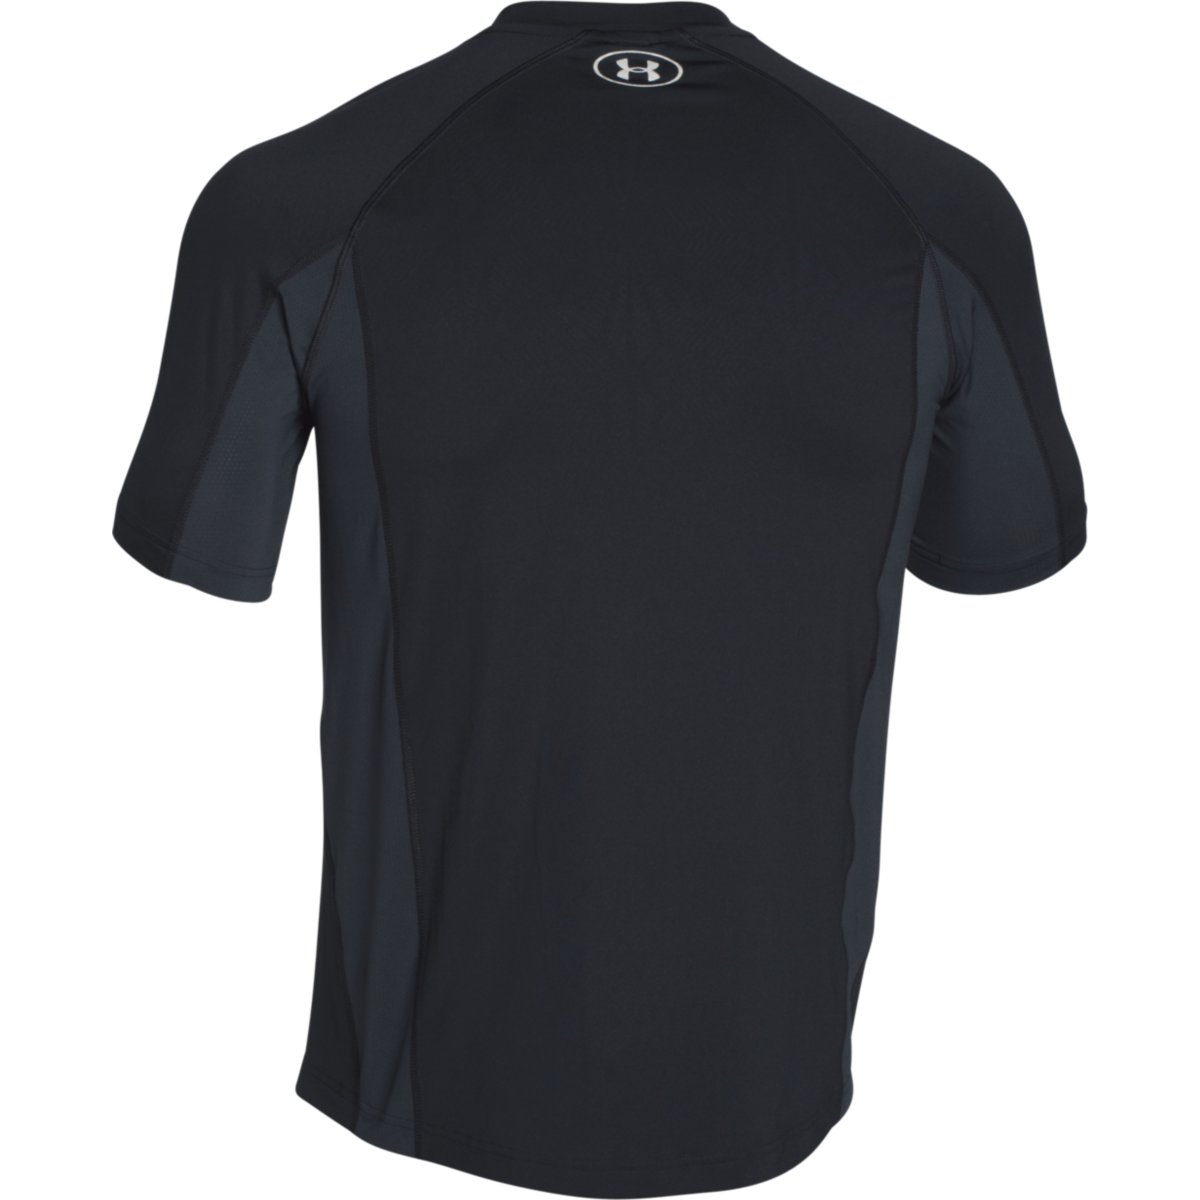 Under Armour Mens CoolSwitch Trail Short Sleeve T Shirt